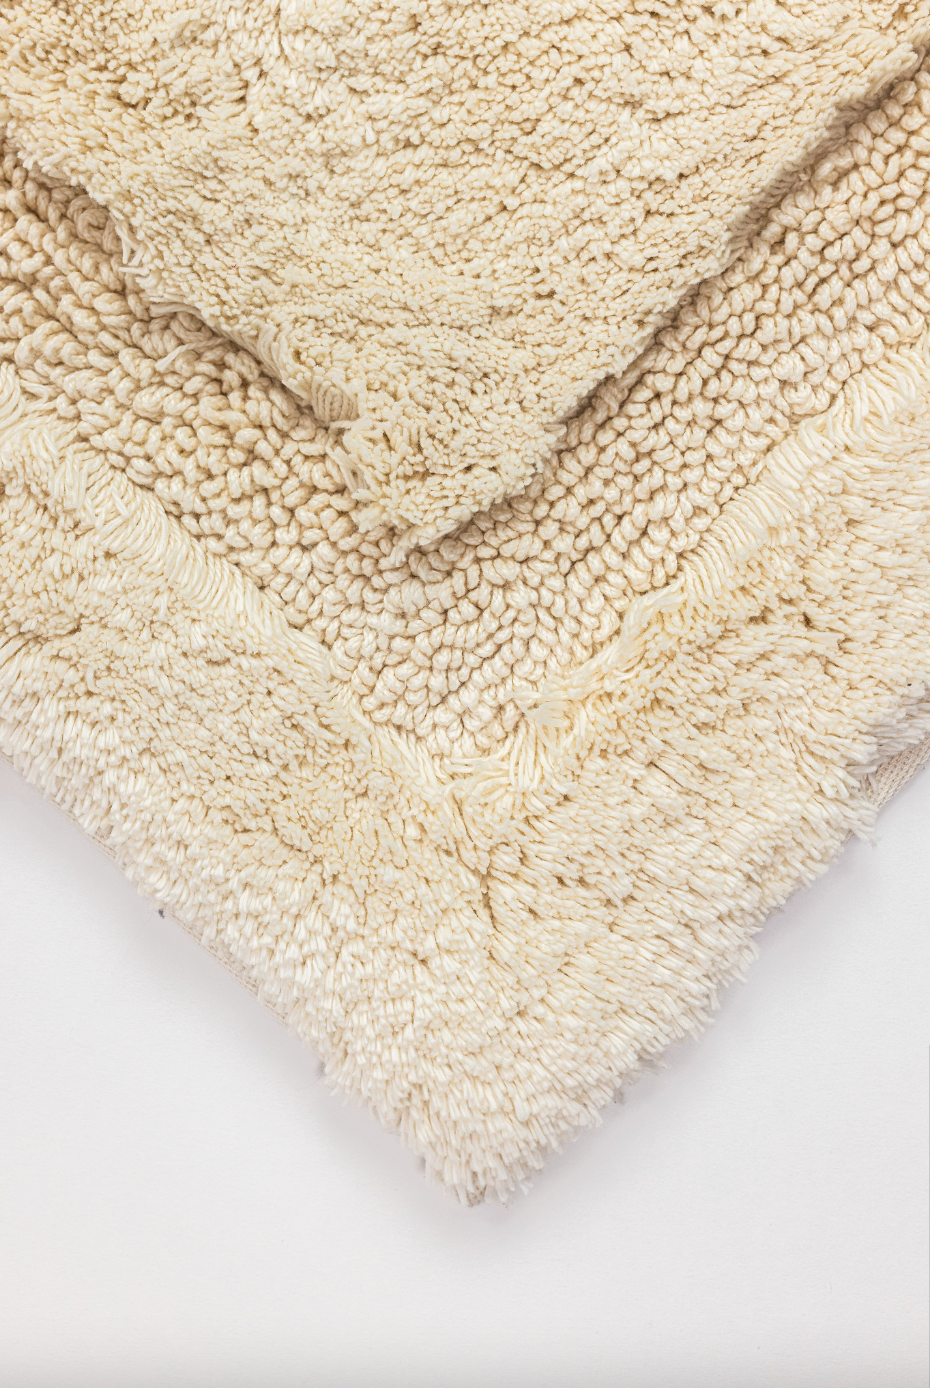 Non-slip backing rugs - Search Shopping